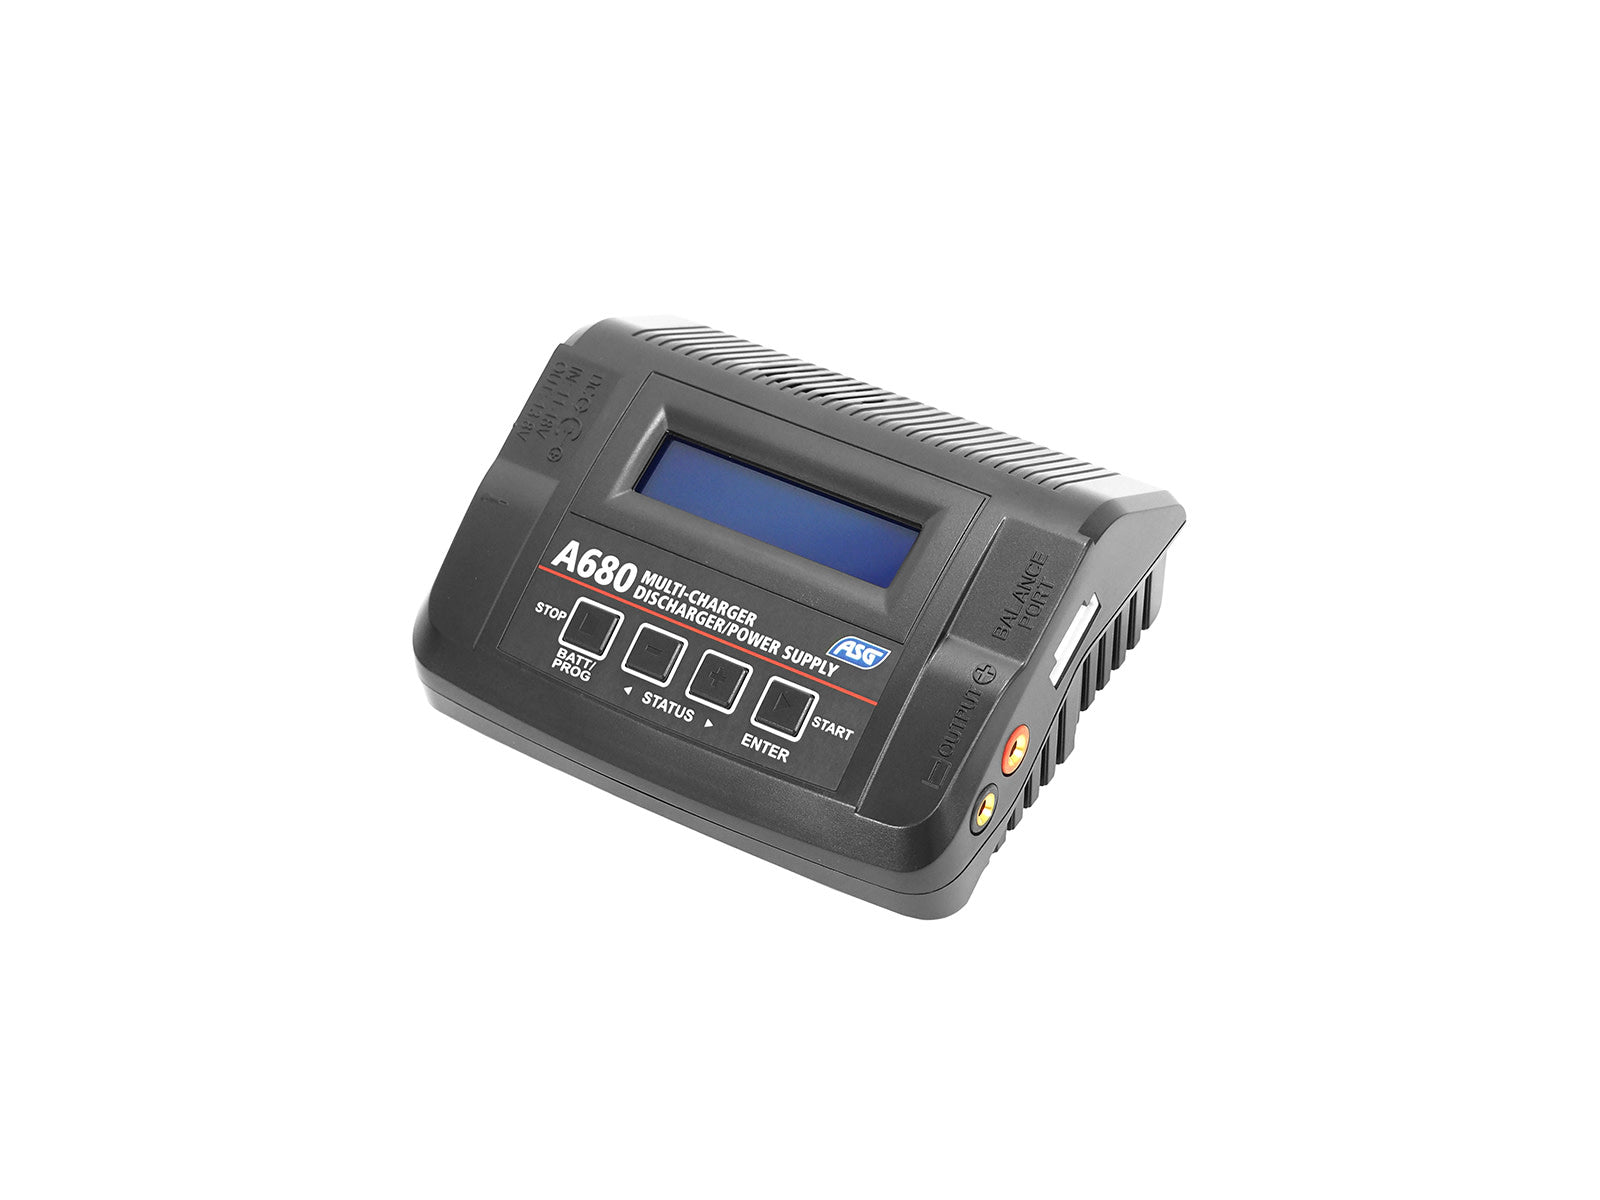 ASG A680 Charger for NiMH/LiPo/NiCd/LiFe/LiHV